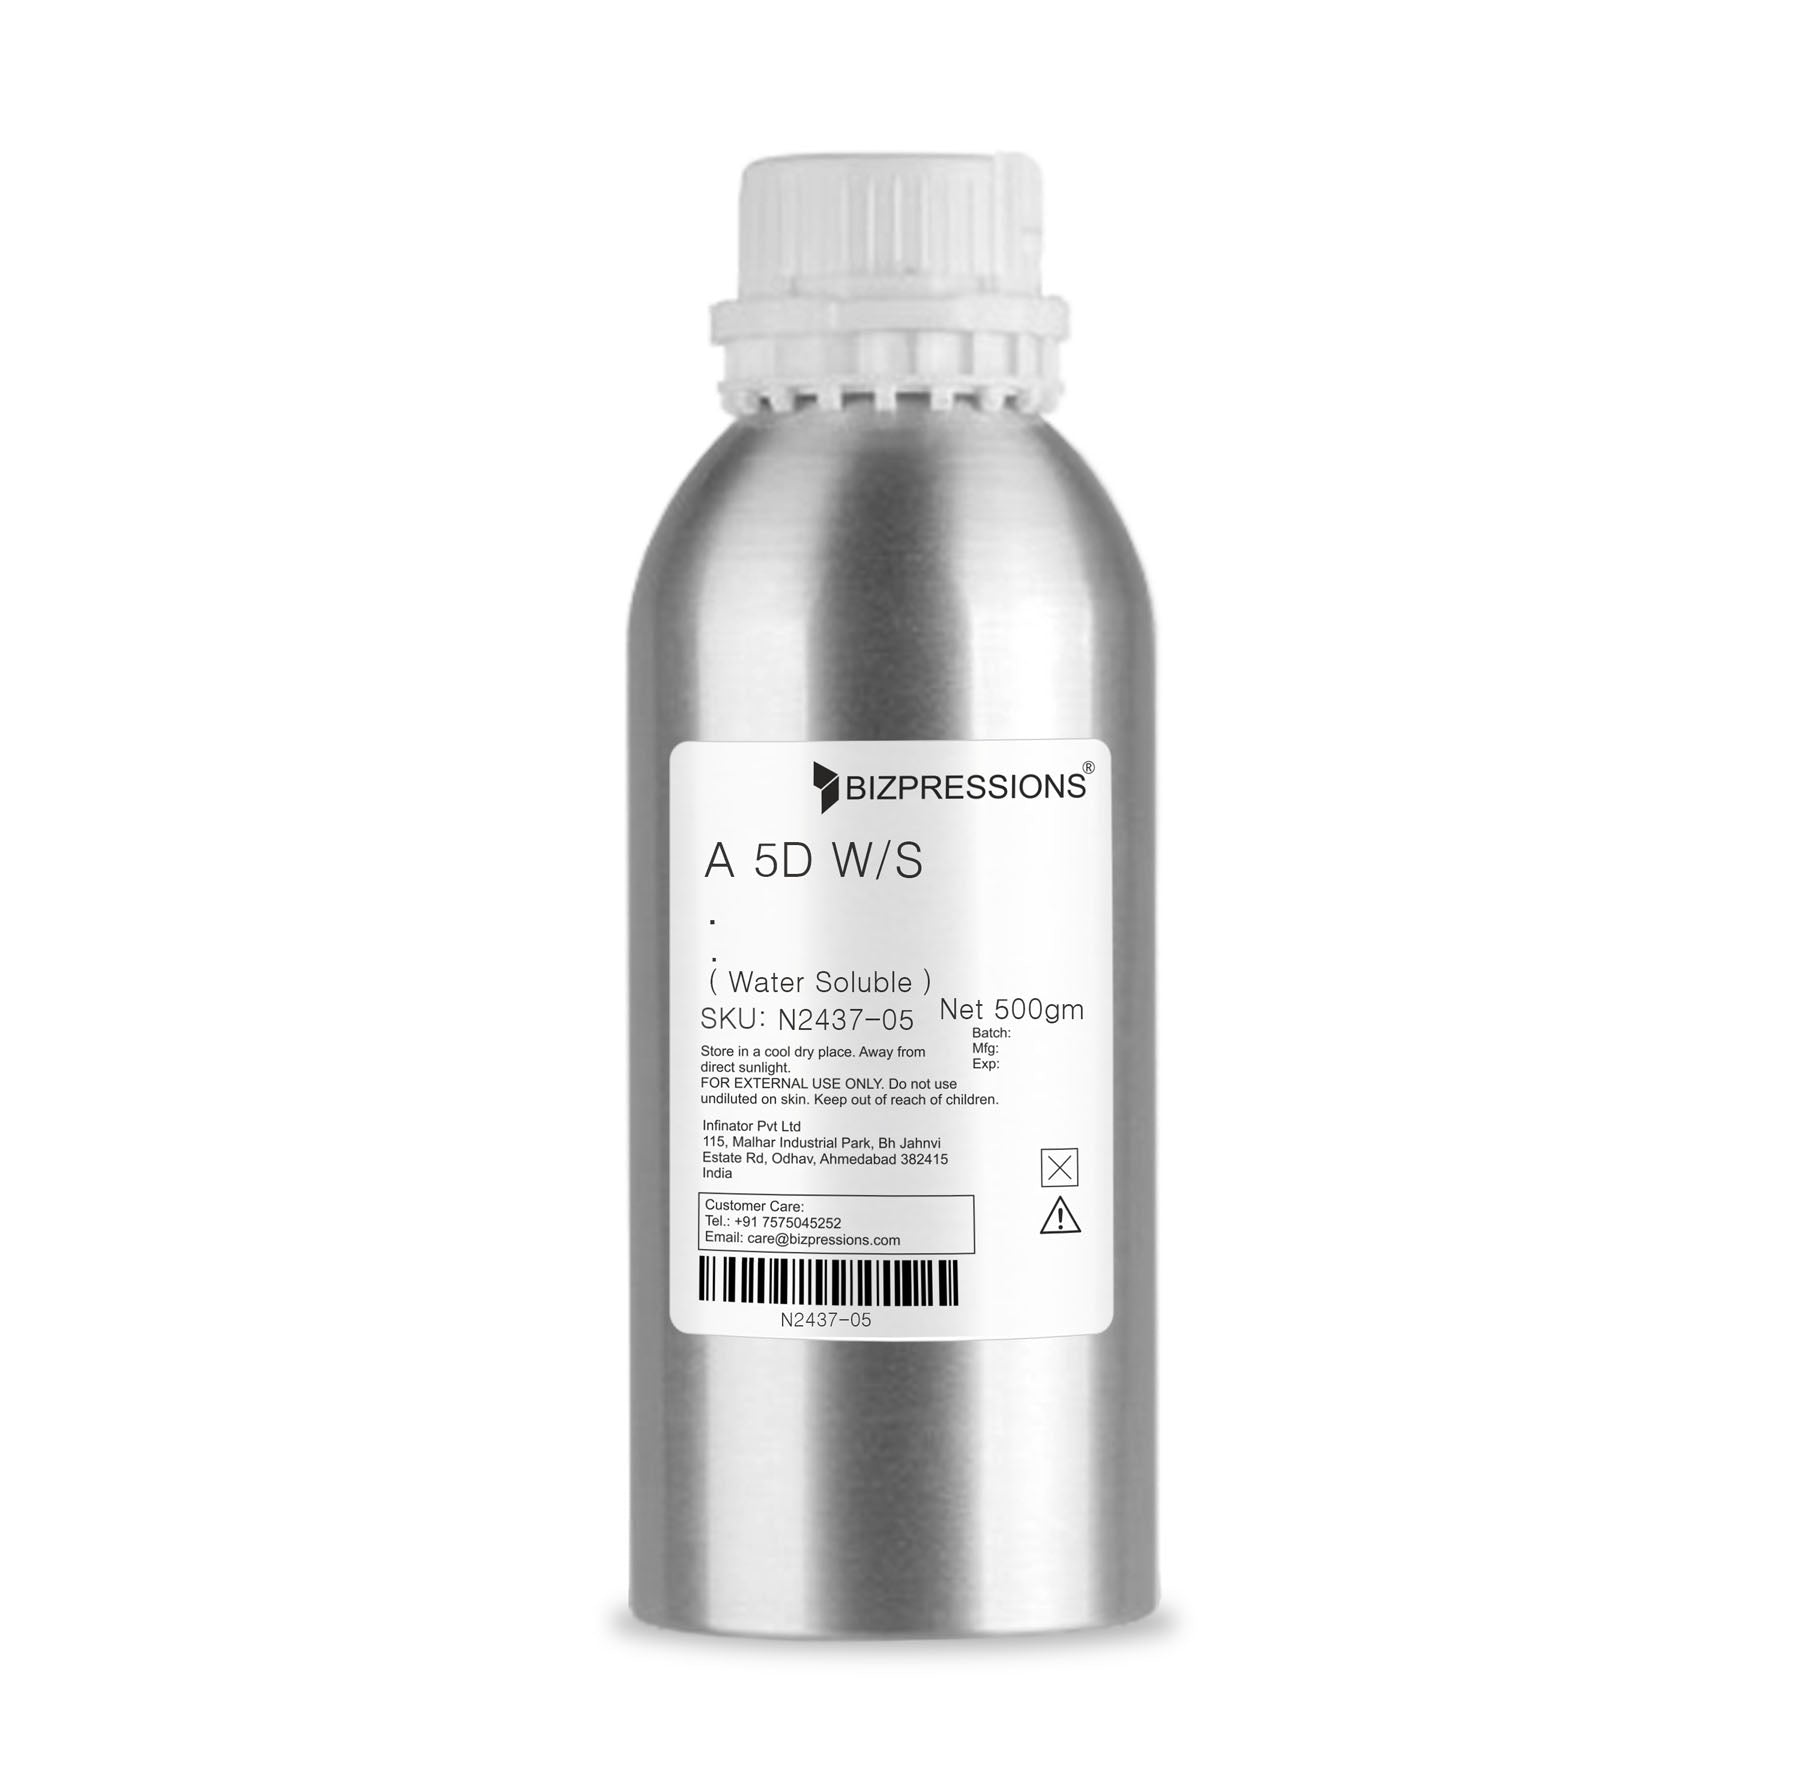 A5D W/S - Fragrance ( Water Soluble ) - 500 gm